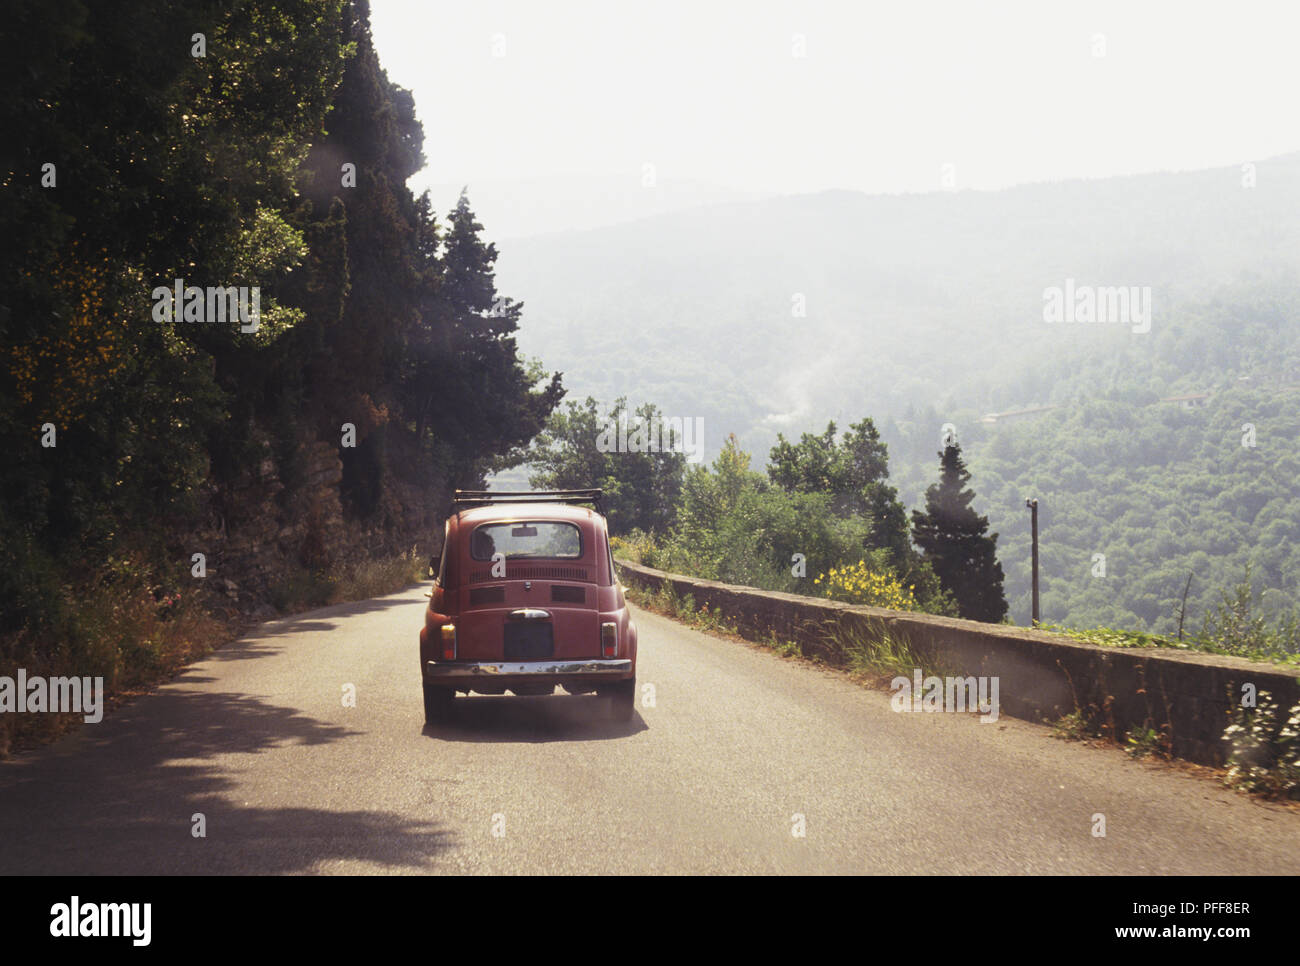 Italy, Eastern Tuscany, nr Borgo San Lorenzo, small red car travelling on mountain road, view from behind Stock Photo